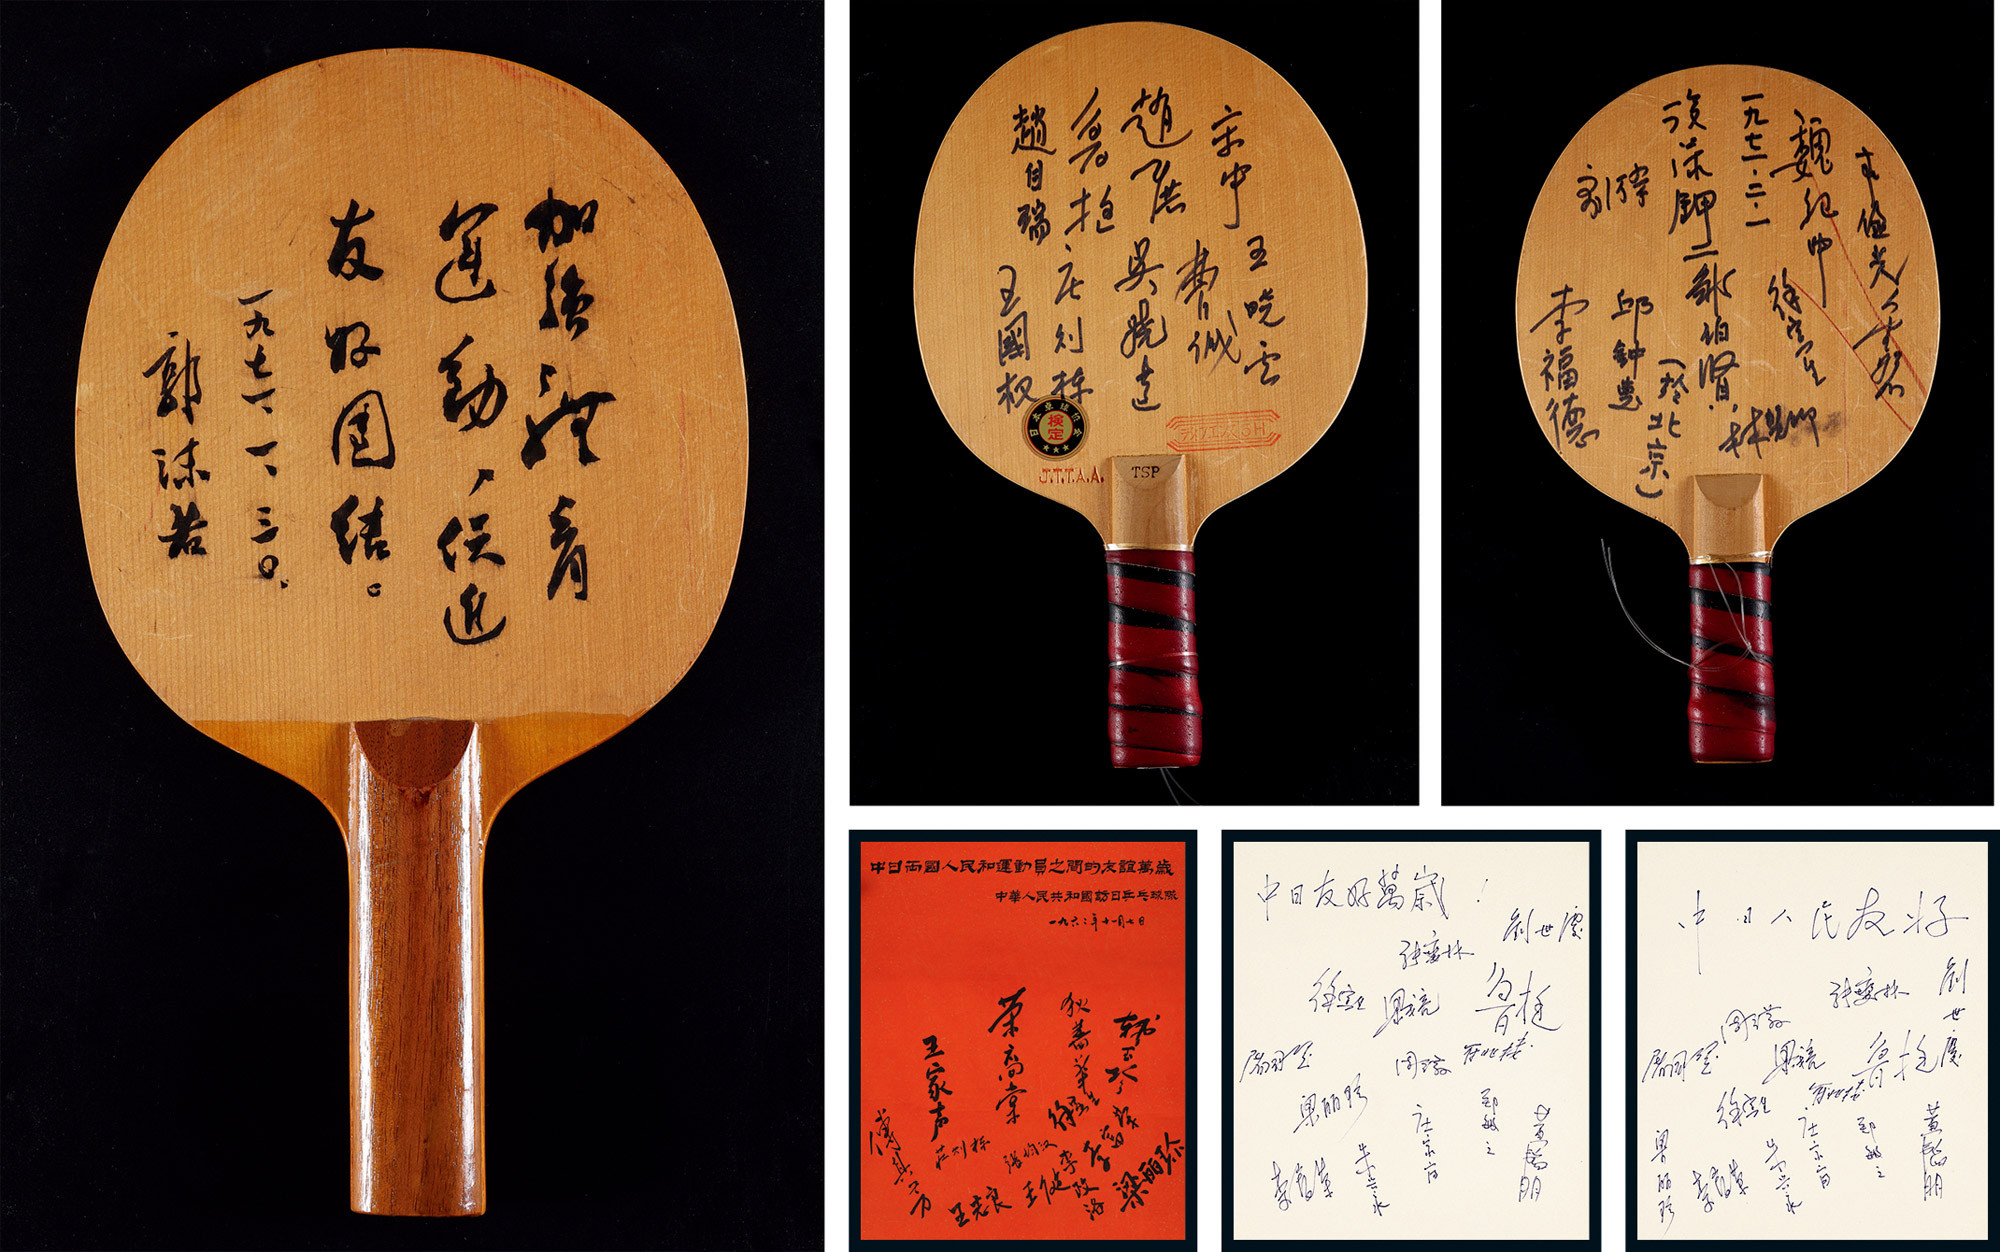 Table tennis bats inscribed by Guo Moruo in 1971 and bats signed by athletes and signed souvenirs 5 pieces in total